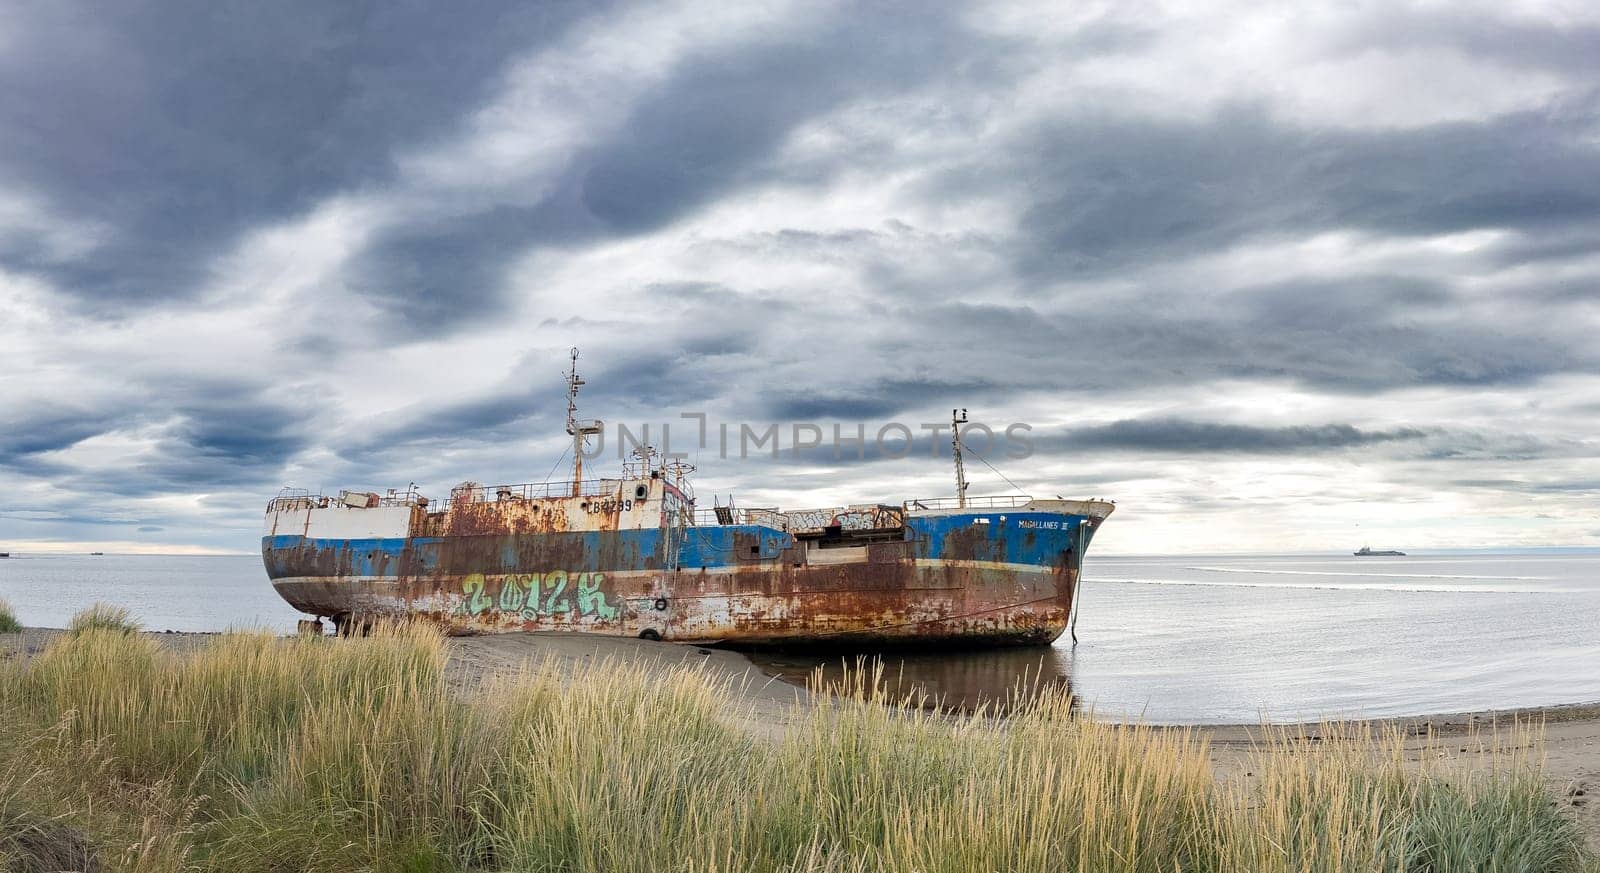 Abandoned rusted ship on a calm shore embodies quiet decay.